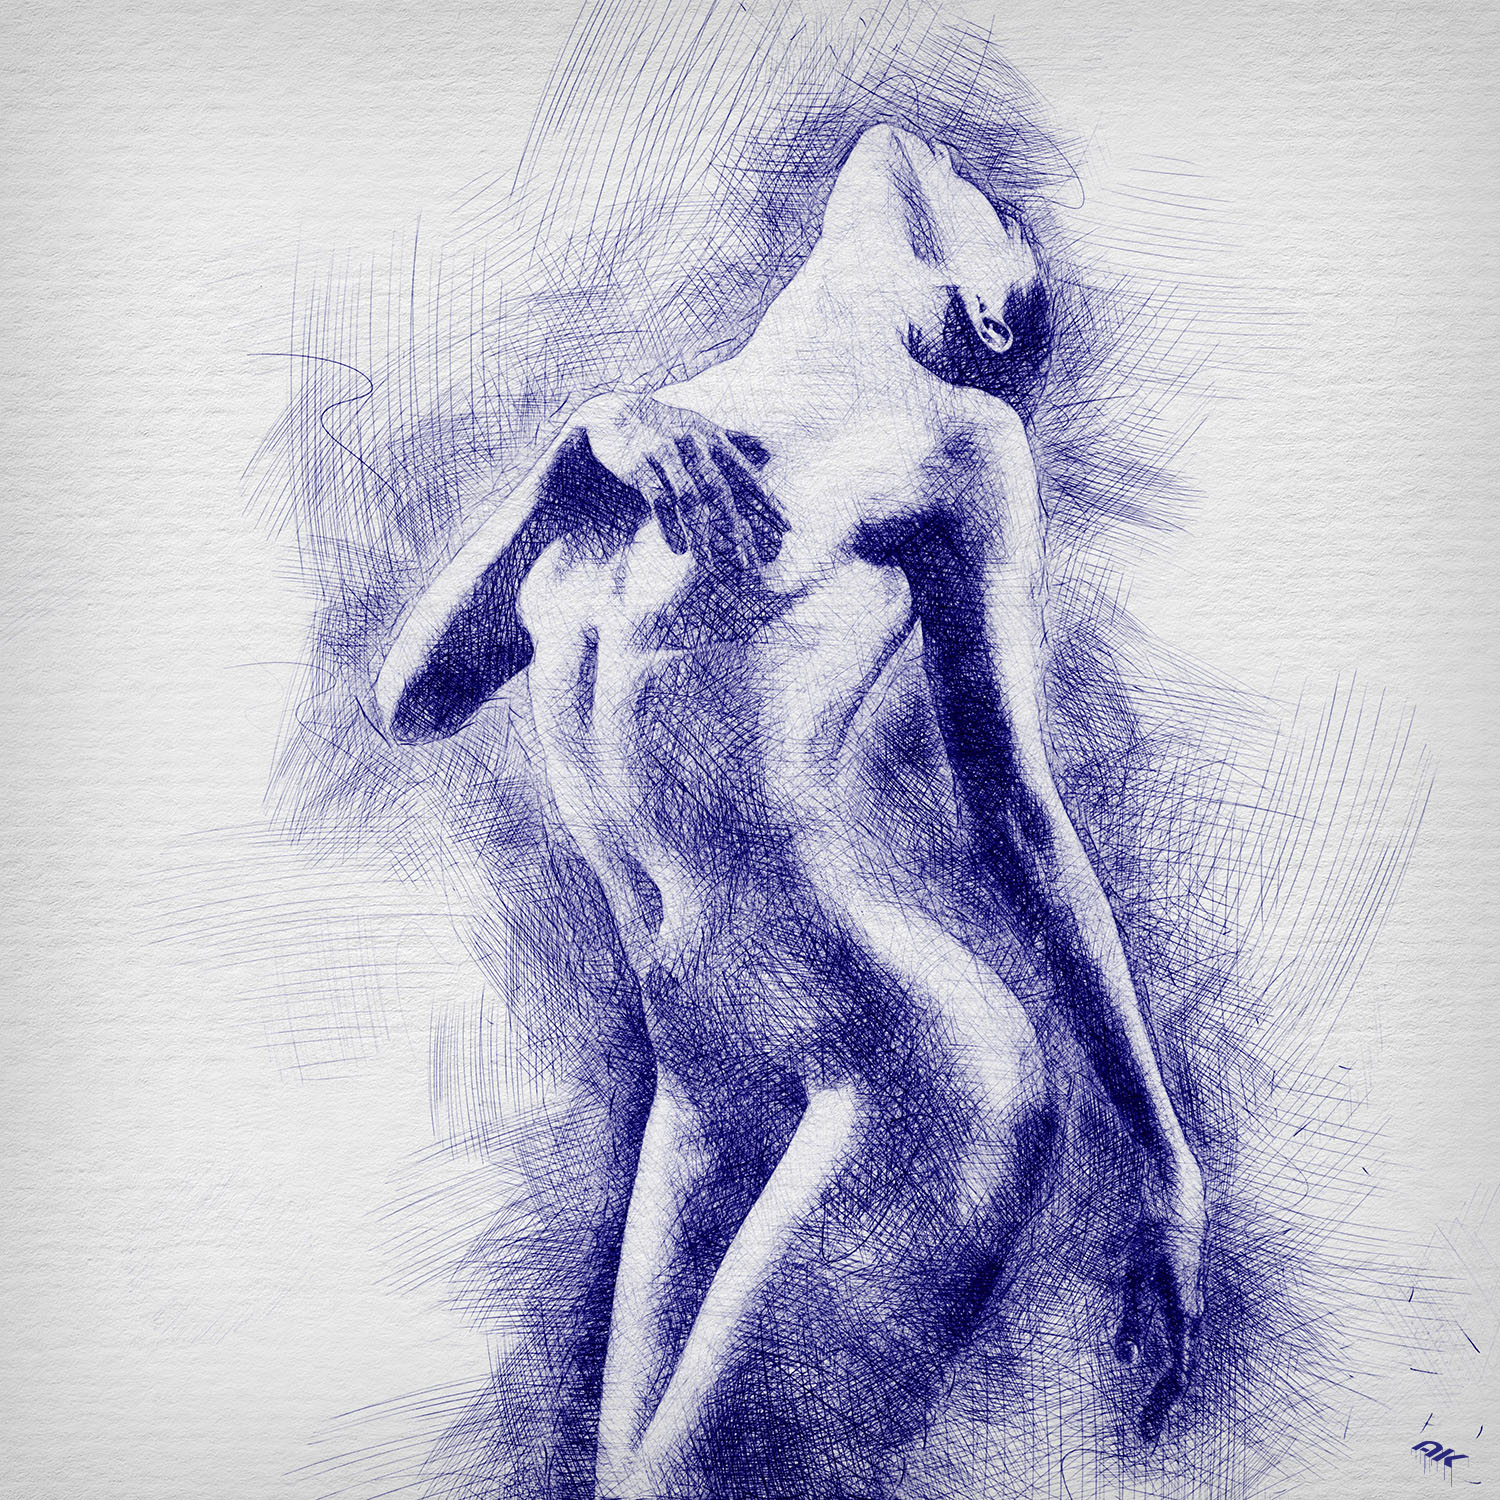 life-drawing-series-5-image-4-copyright-andrew-knutt